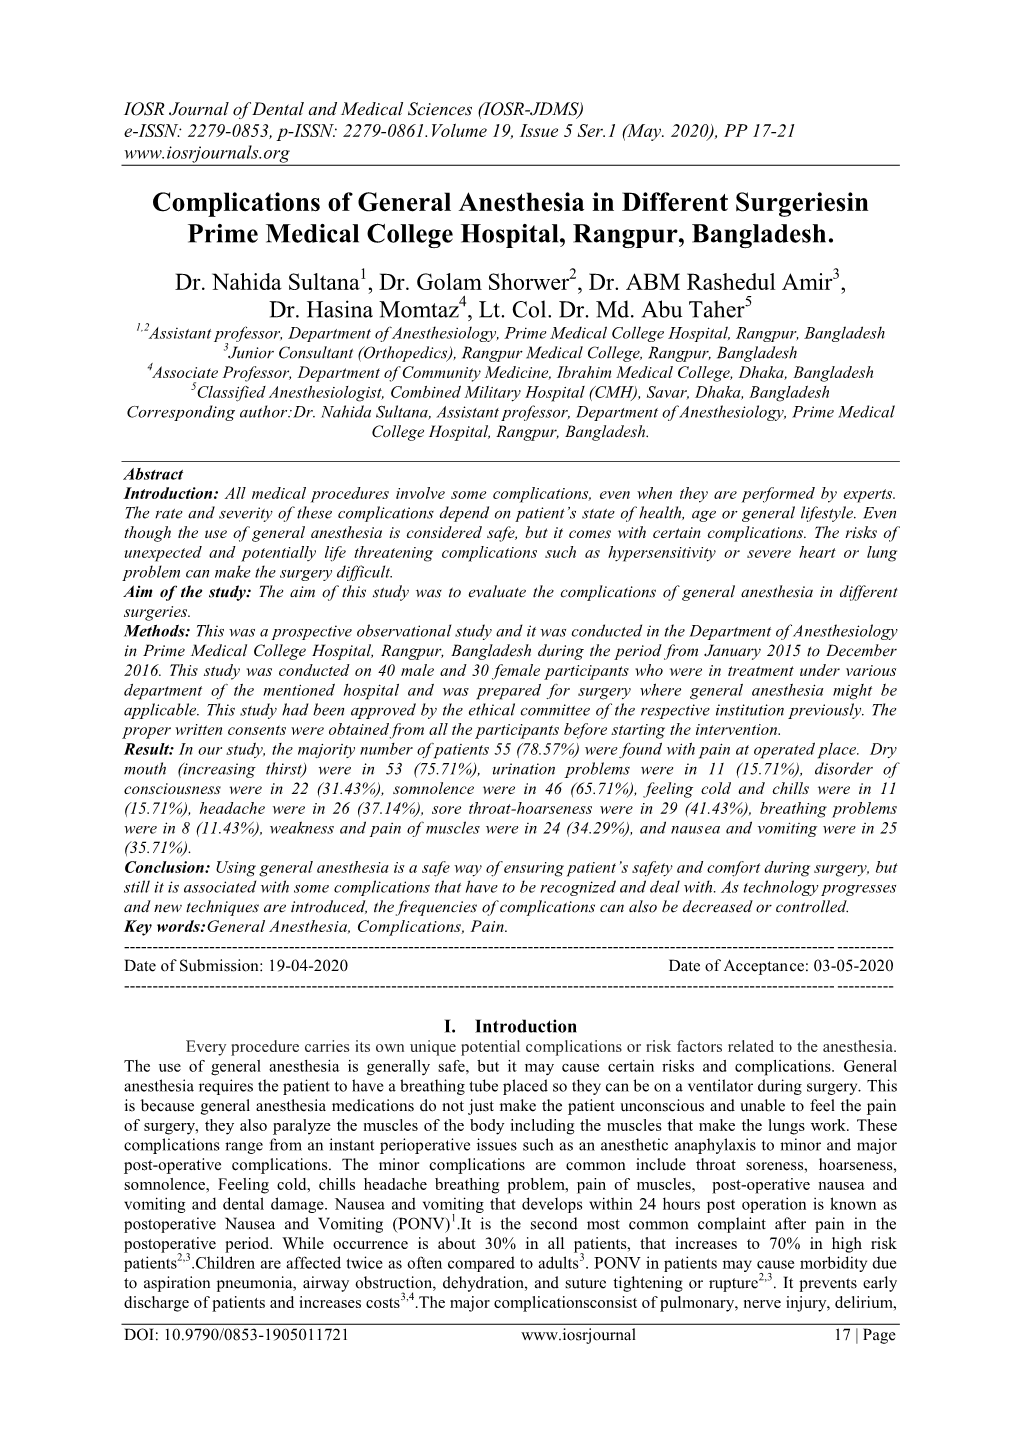 Complications of General Anesthesia in Different Surgeriesin Prime Medical College Hospital, Rangpur, Bangladesh